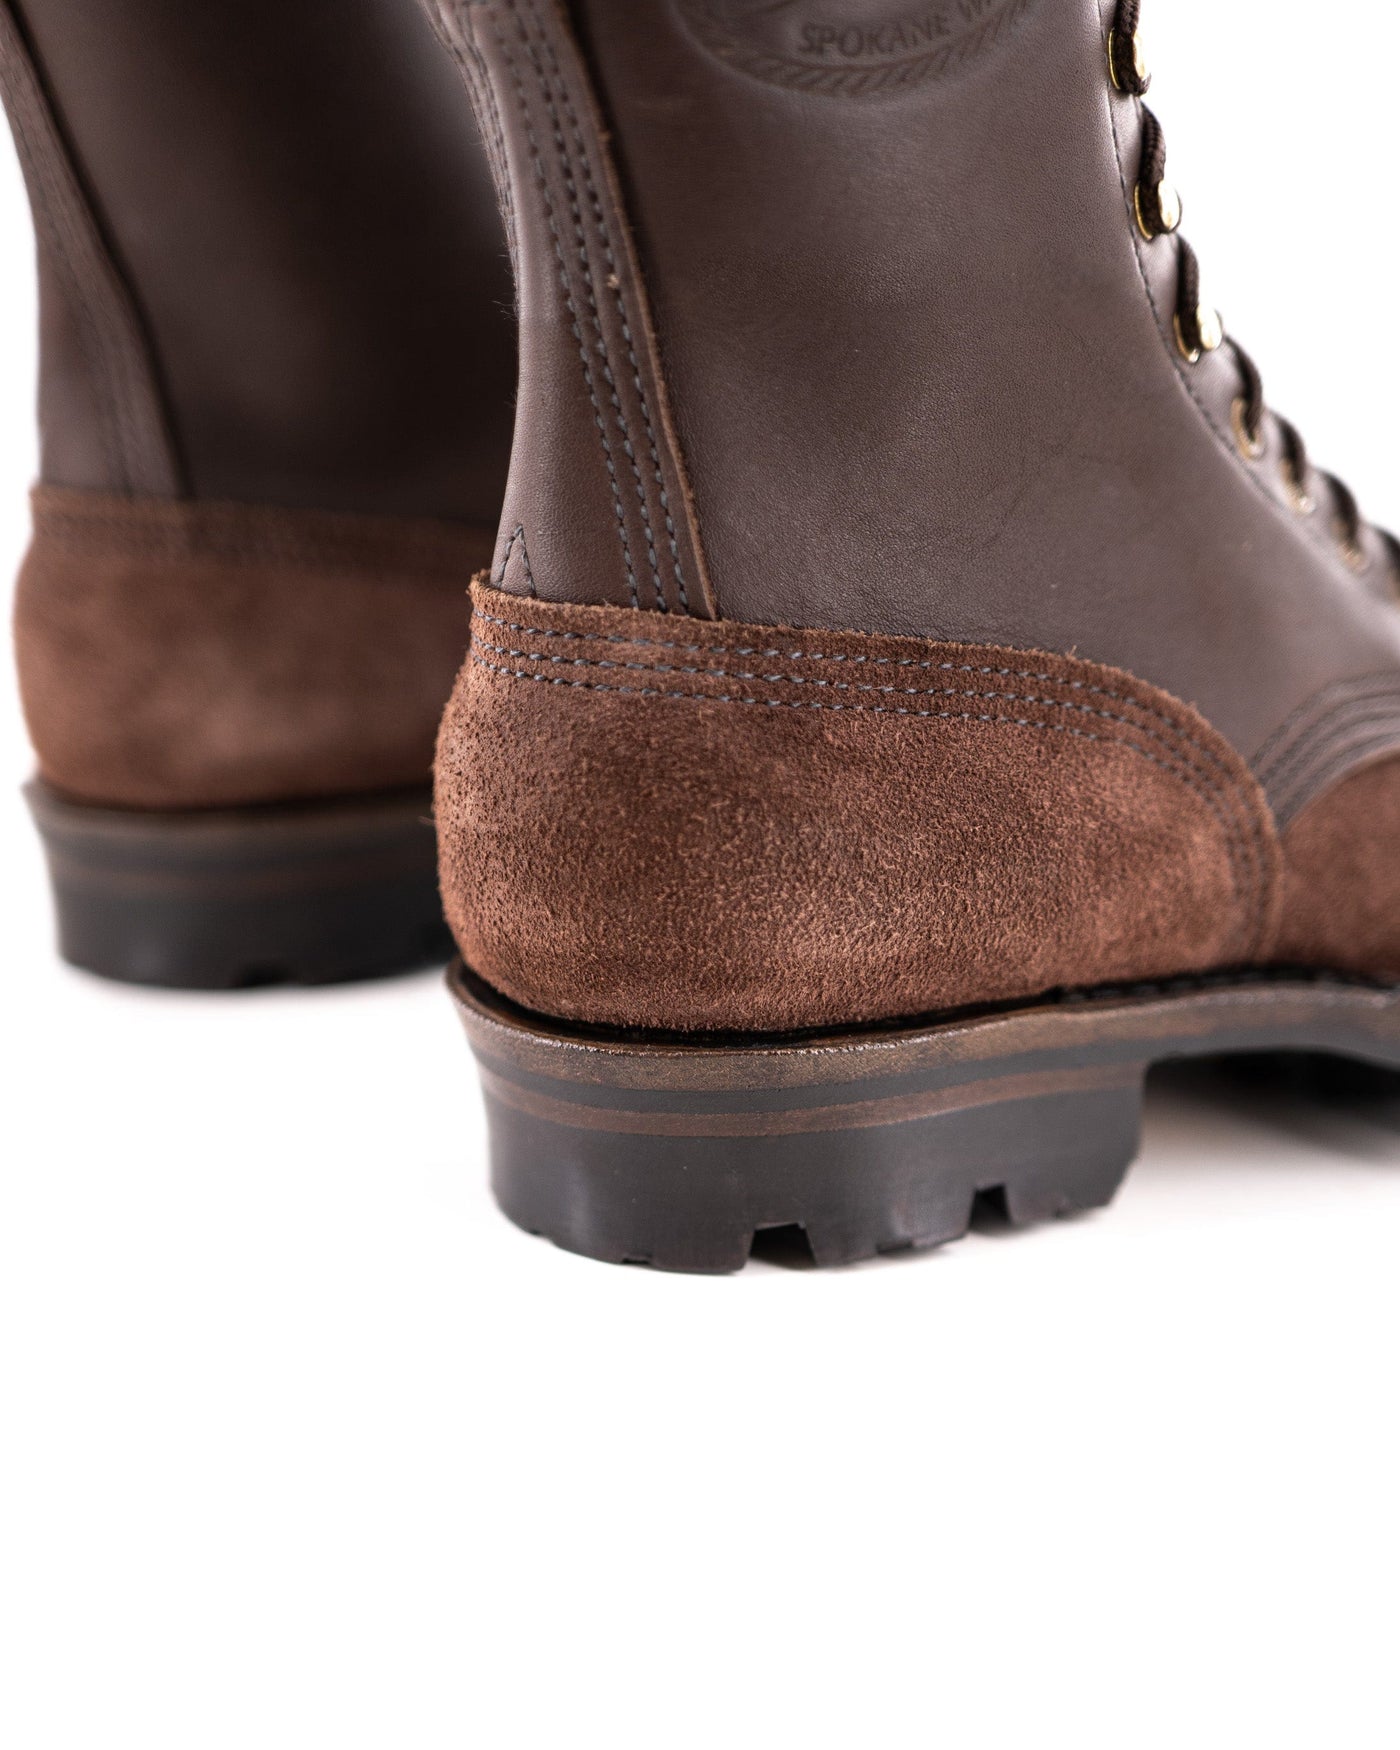 Superduty S (Safety Toe) - Brown